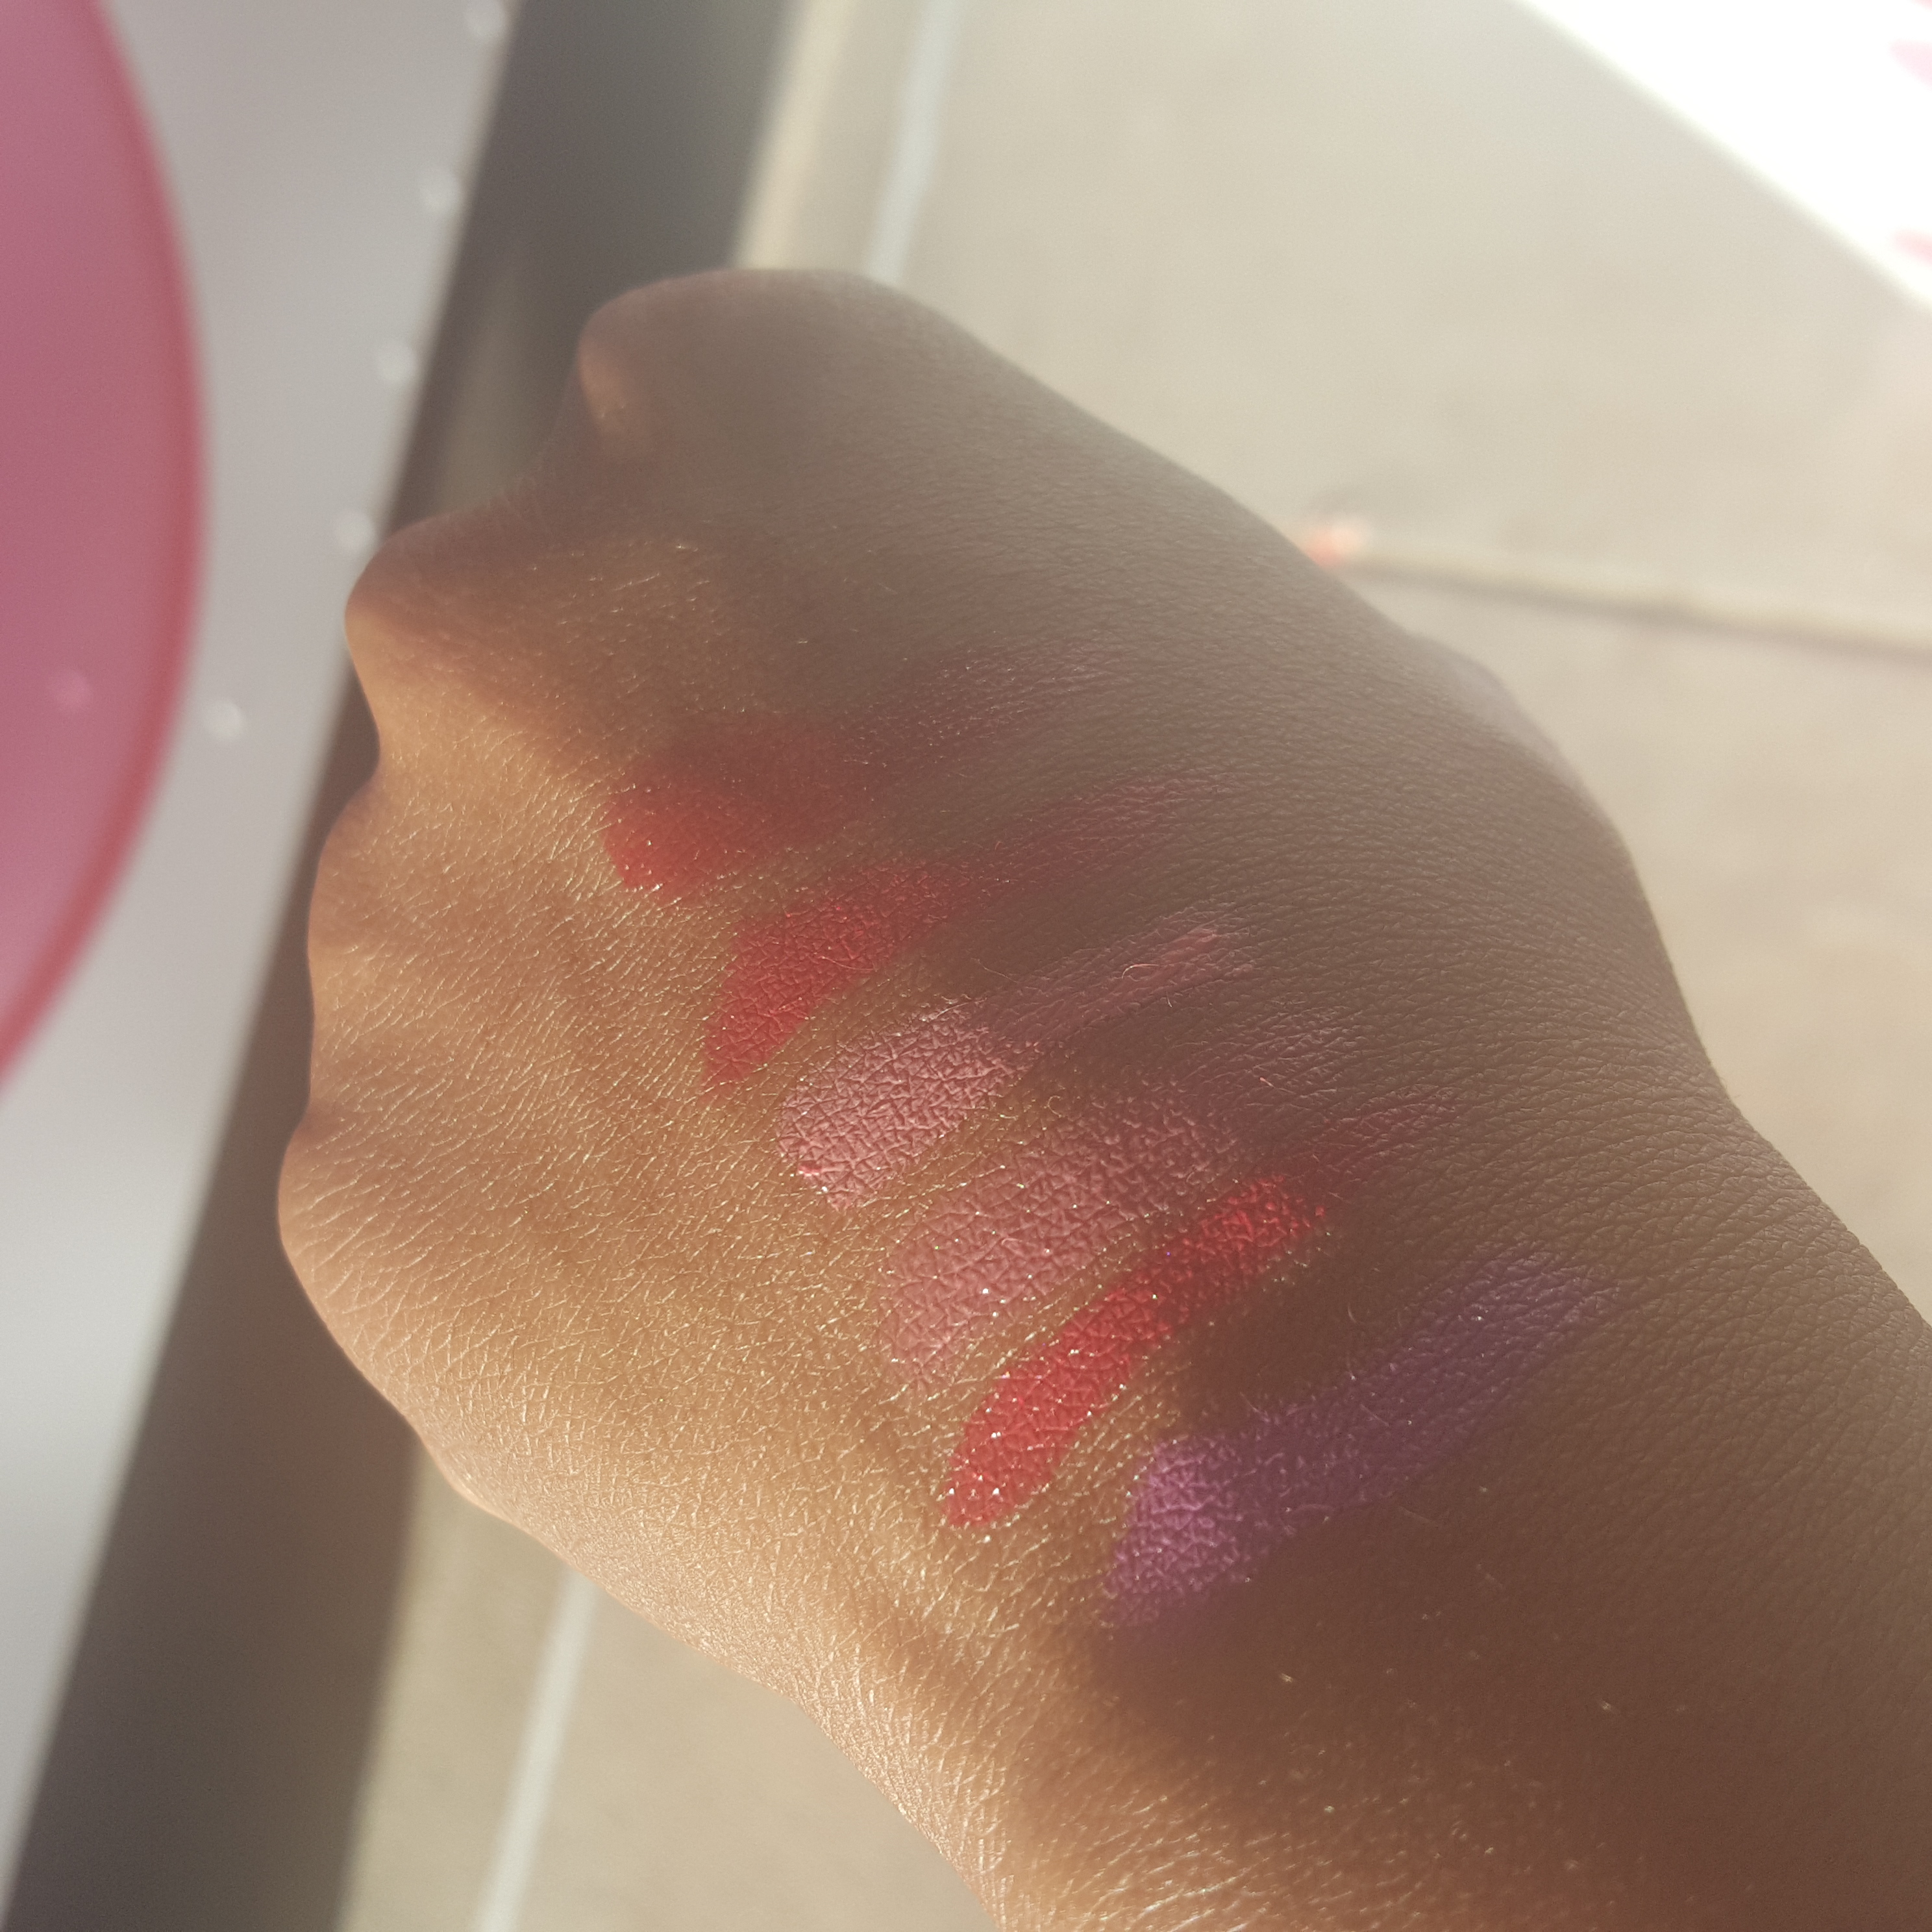 alex brown tone and hands with lipsticks